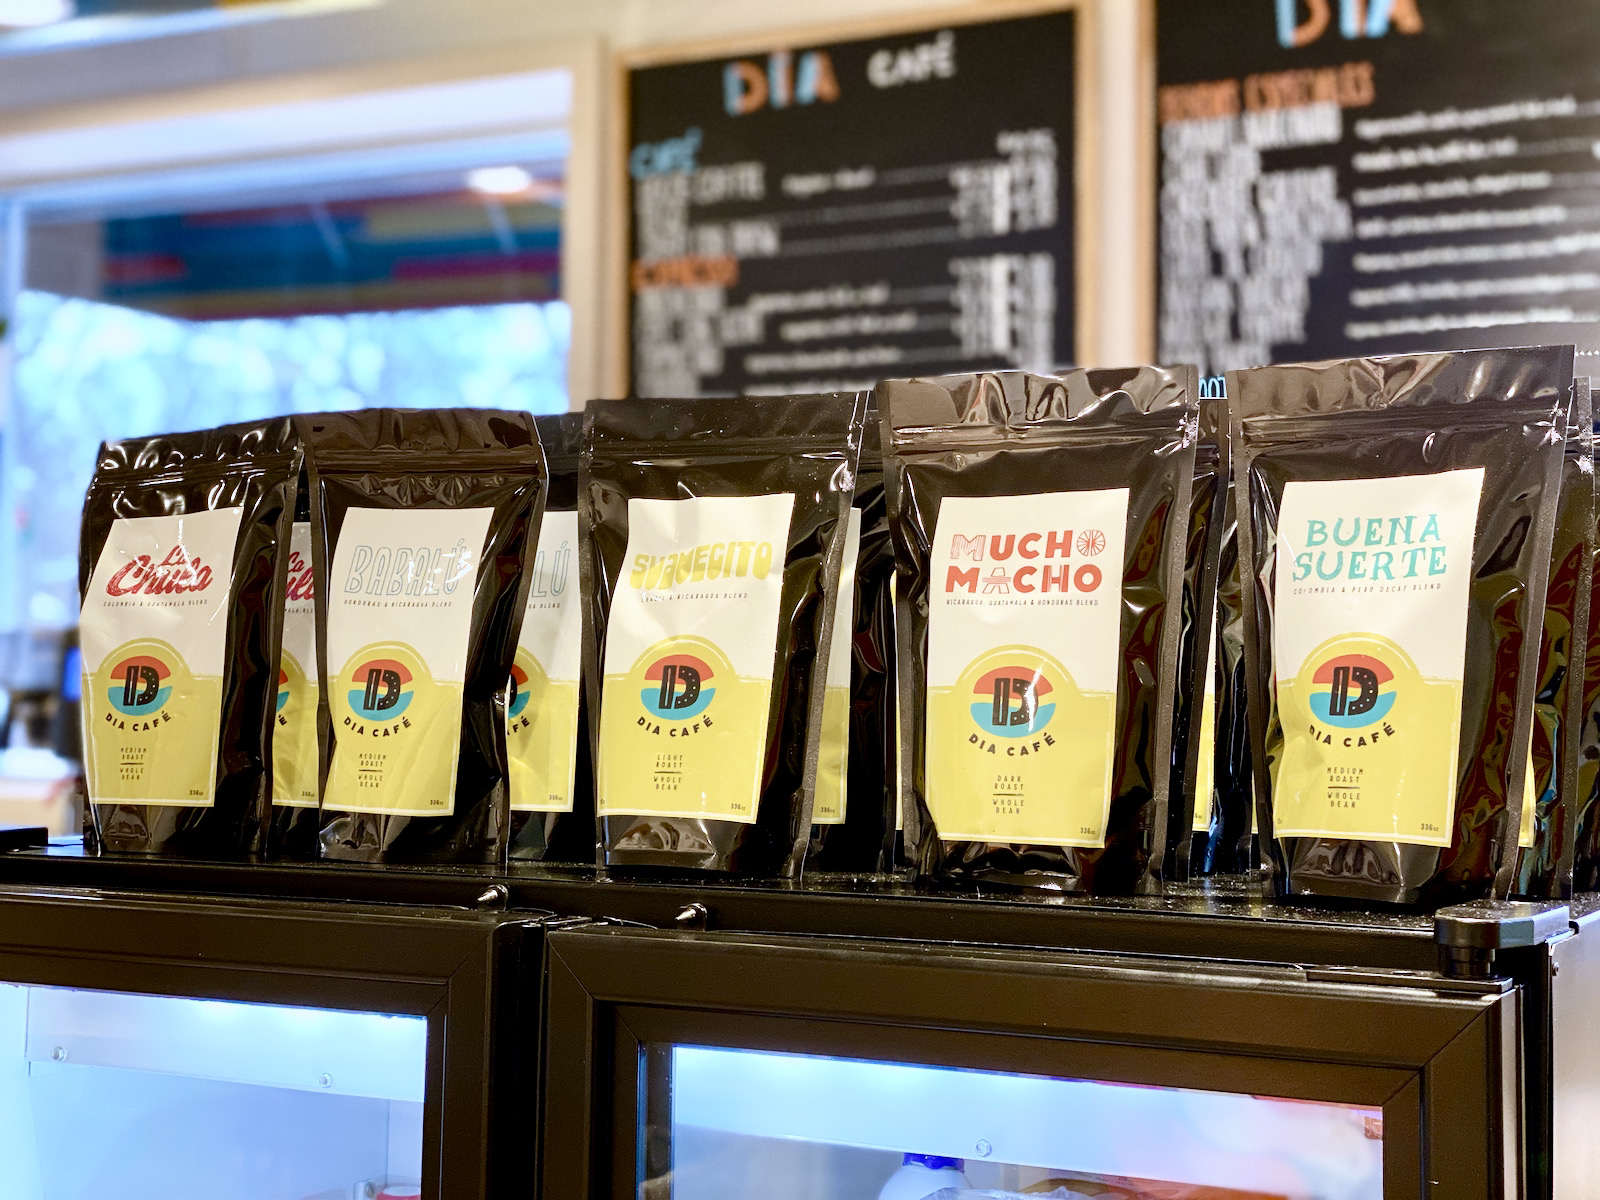 Bags of Dia Cafe coffee